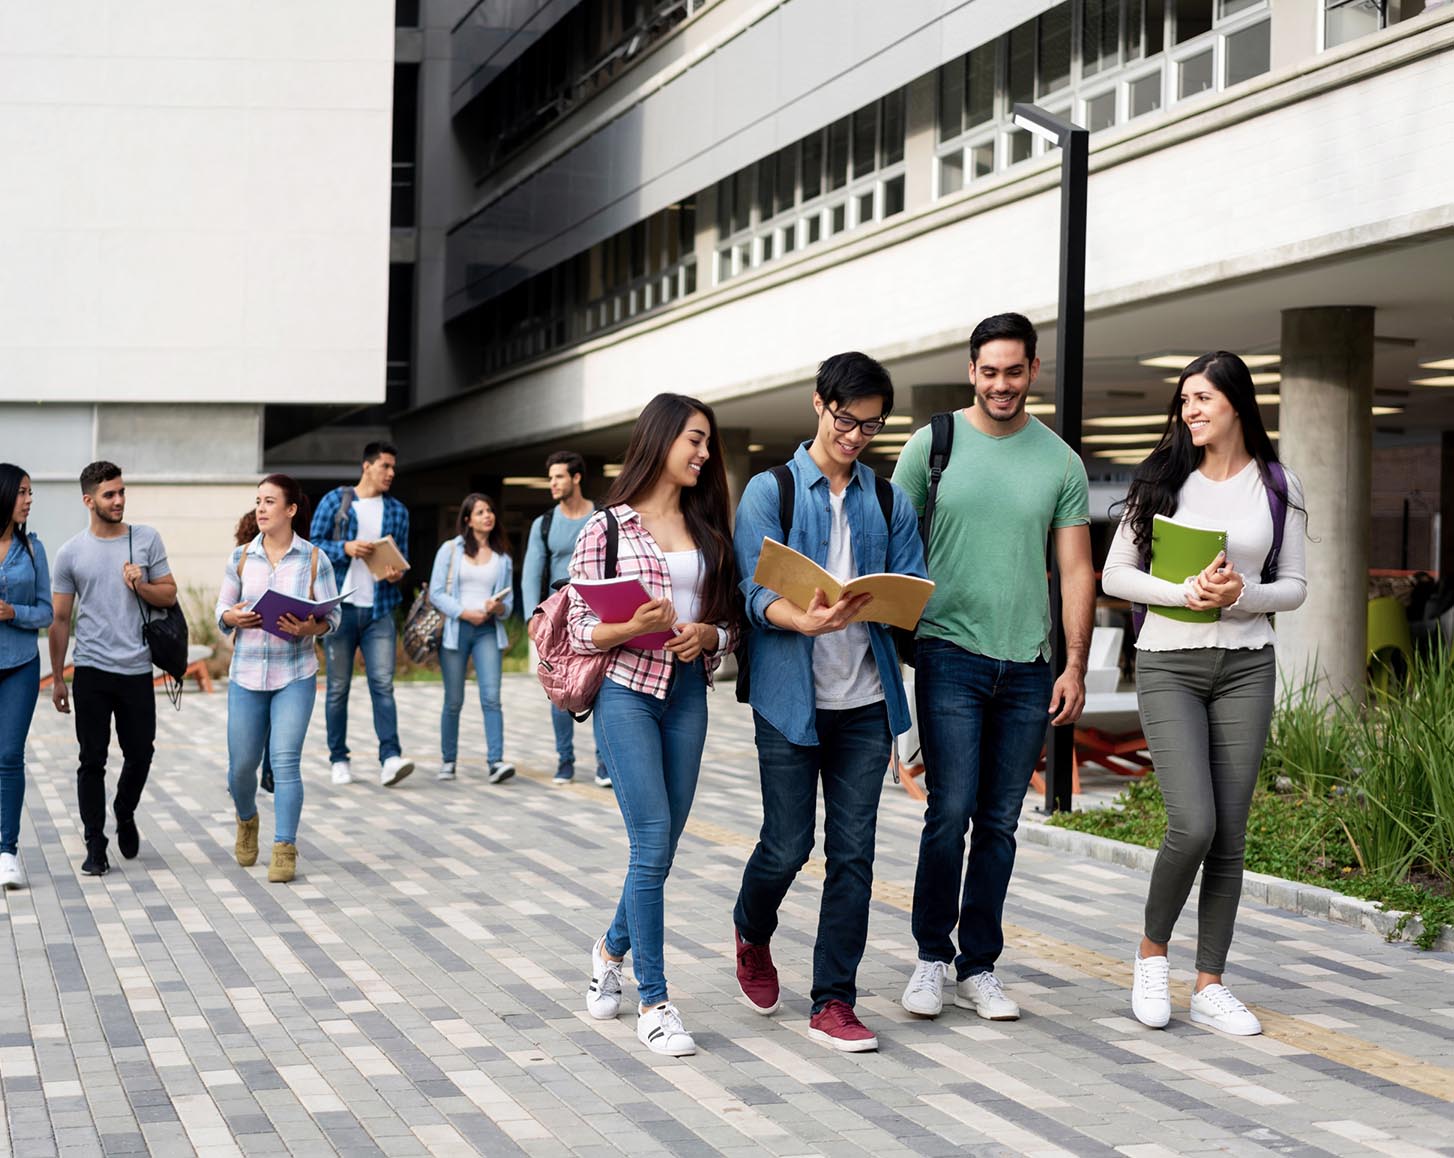 A group of tertiary students holding books, smiling and walking through campus